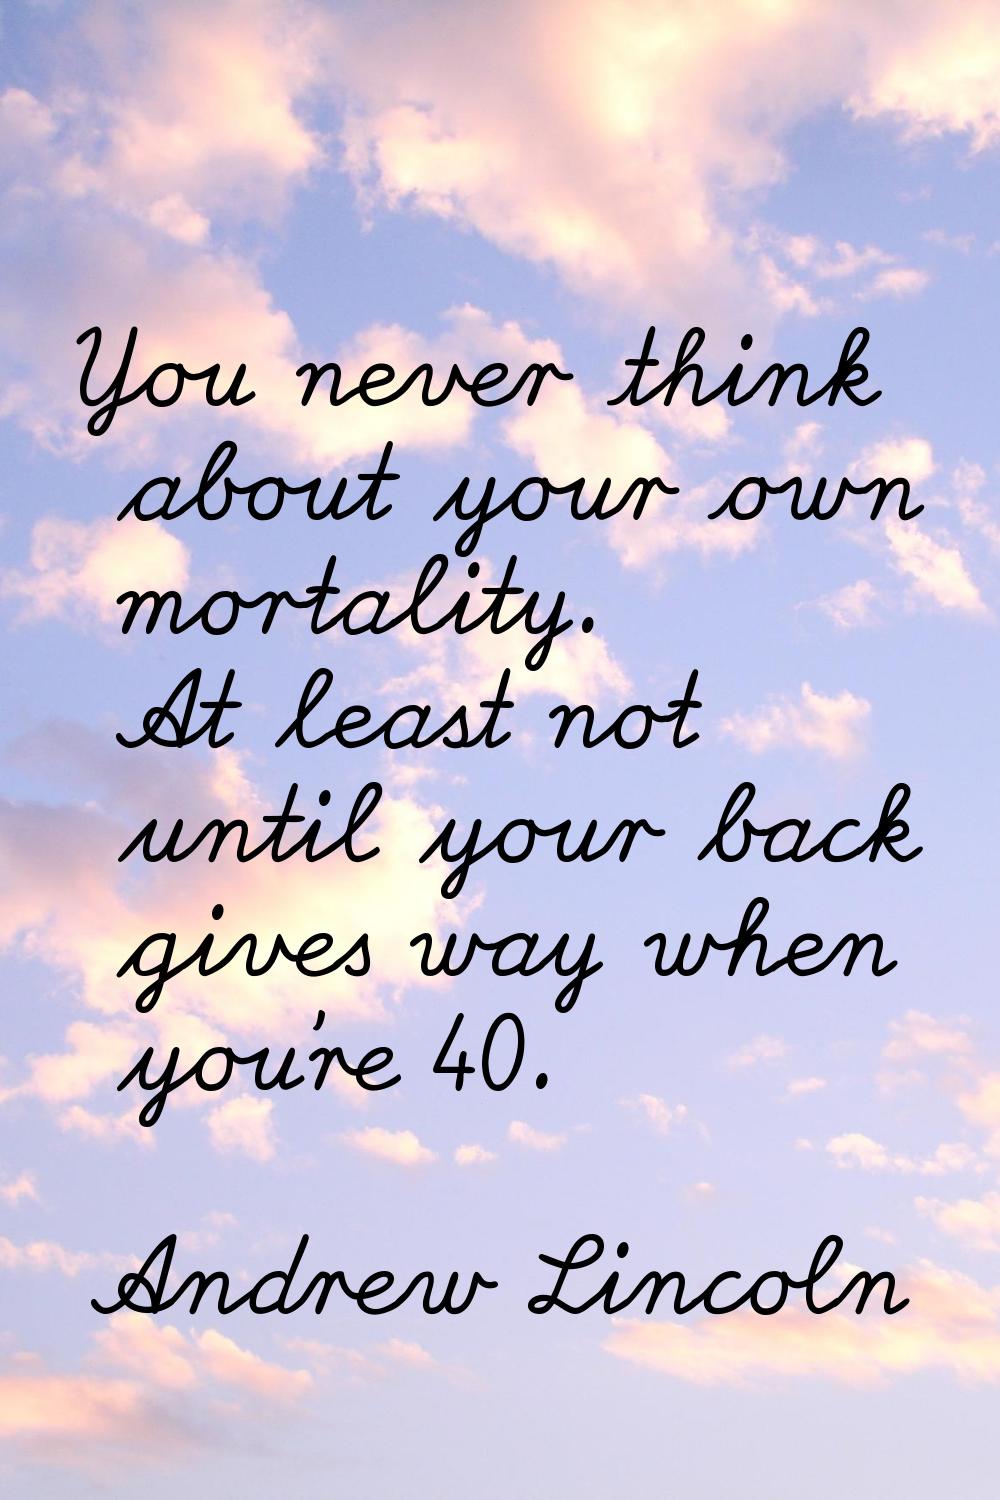 You never think about your own mortality. At least not until your back gives way when you're 40.